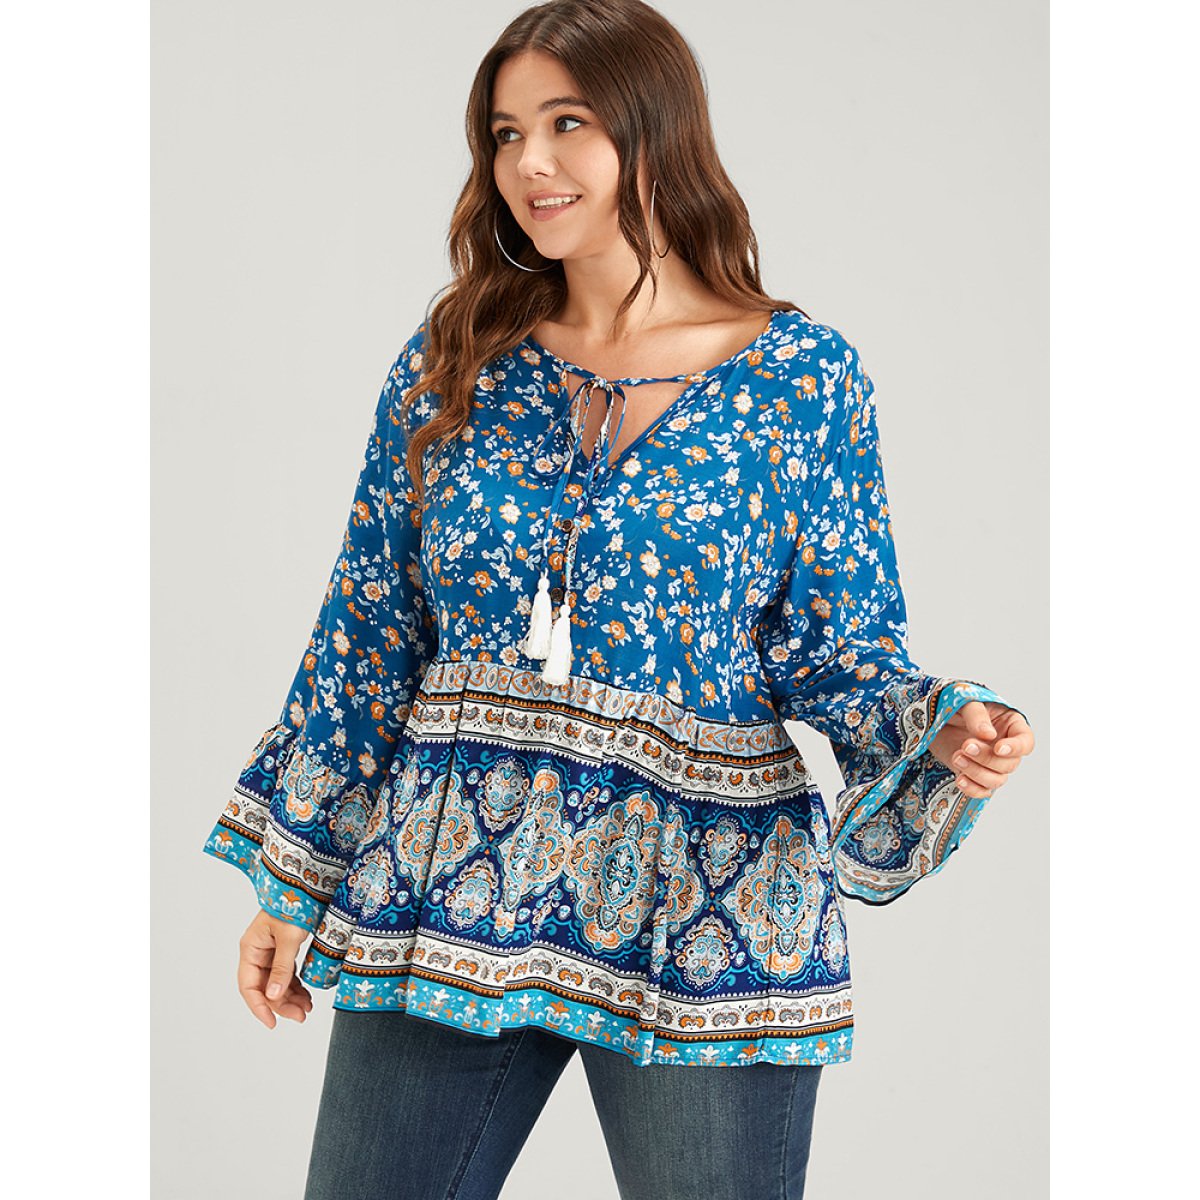 

Floral Print Bohemian Plus Size Women Vocation Sundress Tribal Ties Bell Sleeve V Neck Casual Blouses BloomChic, Blue